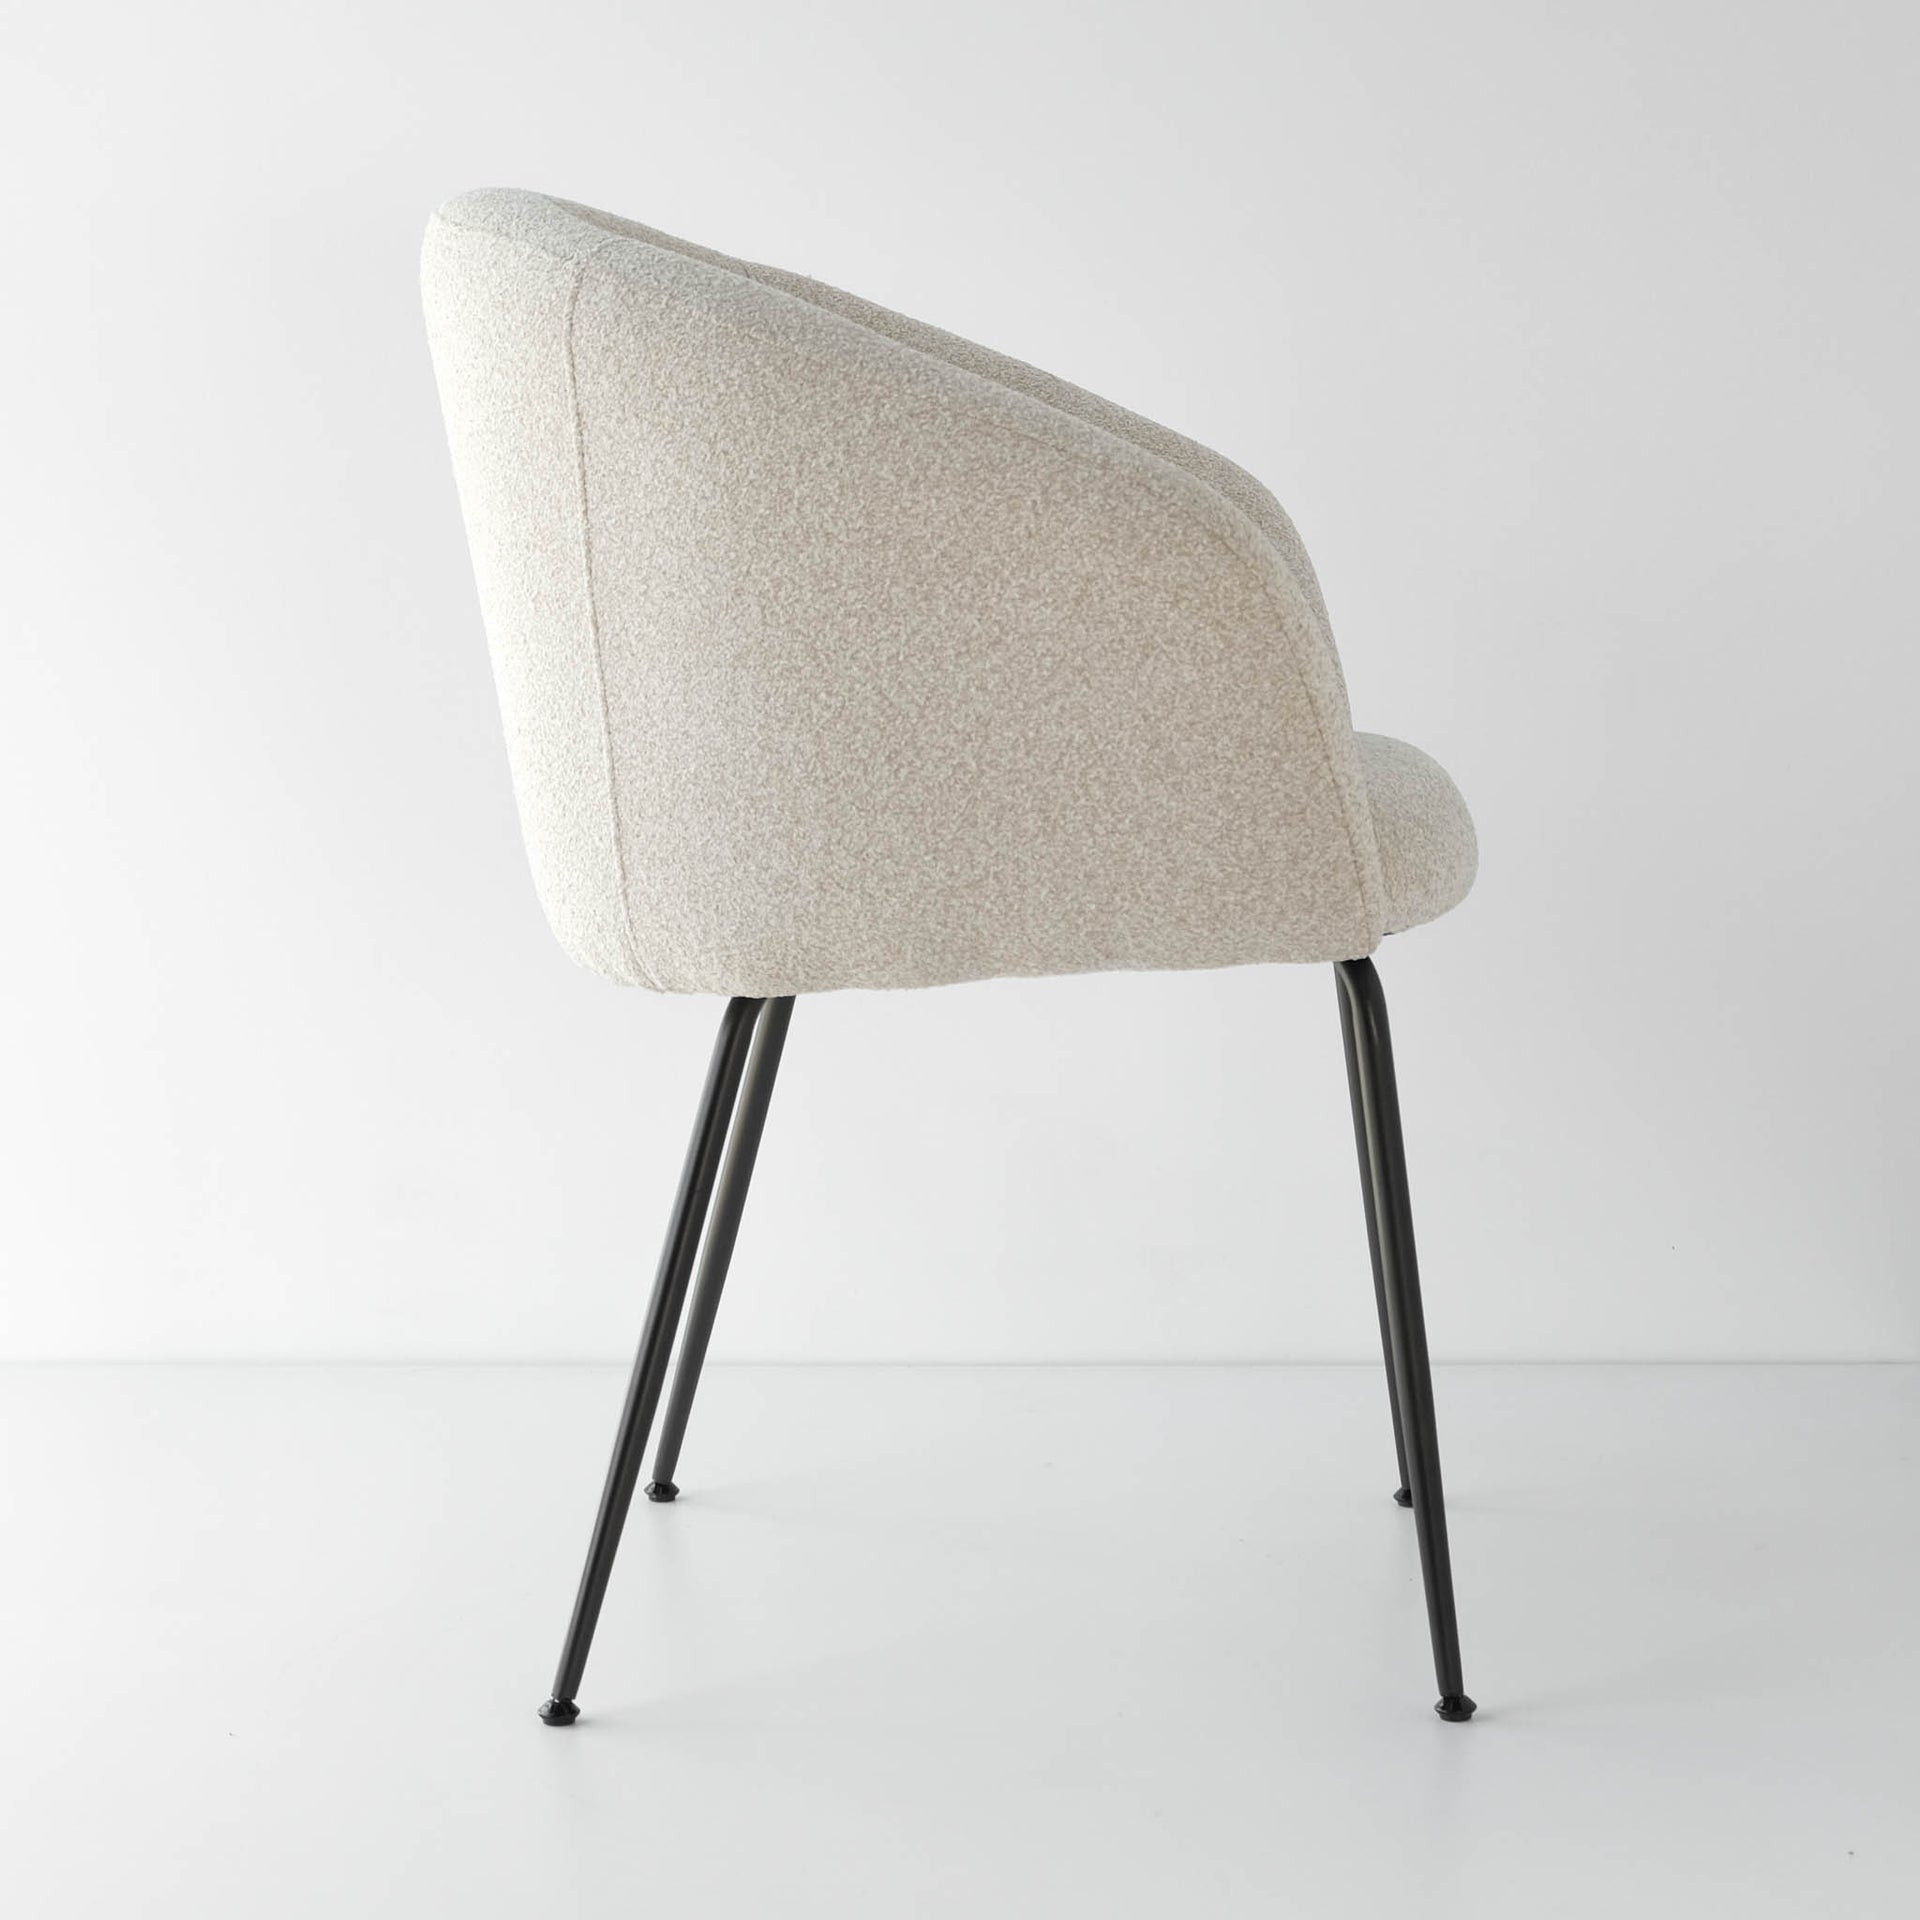 Sleek and stylish, a oatmeal dining chair perfect for contemporary spaces